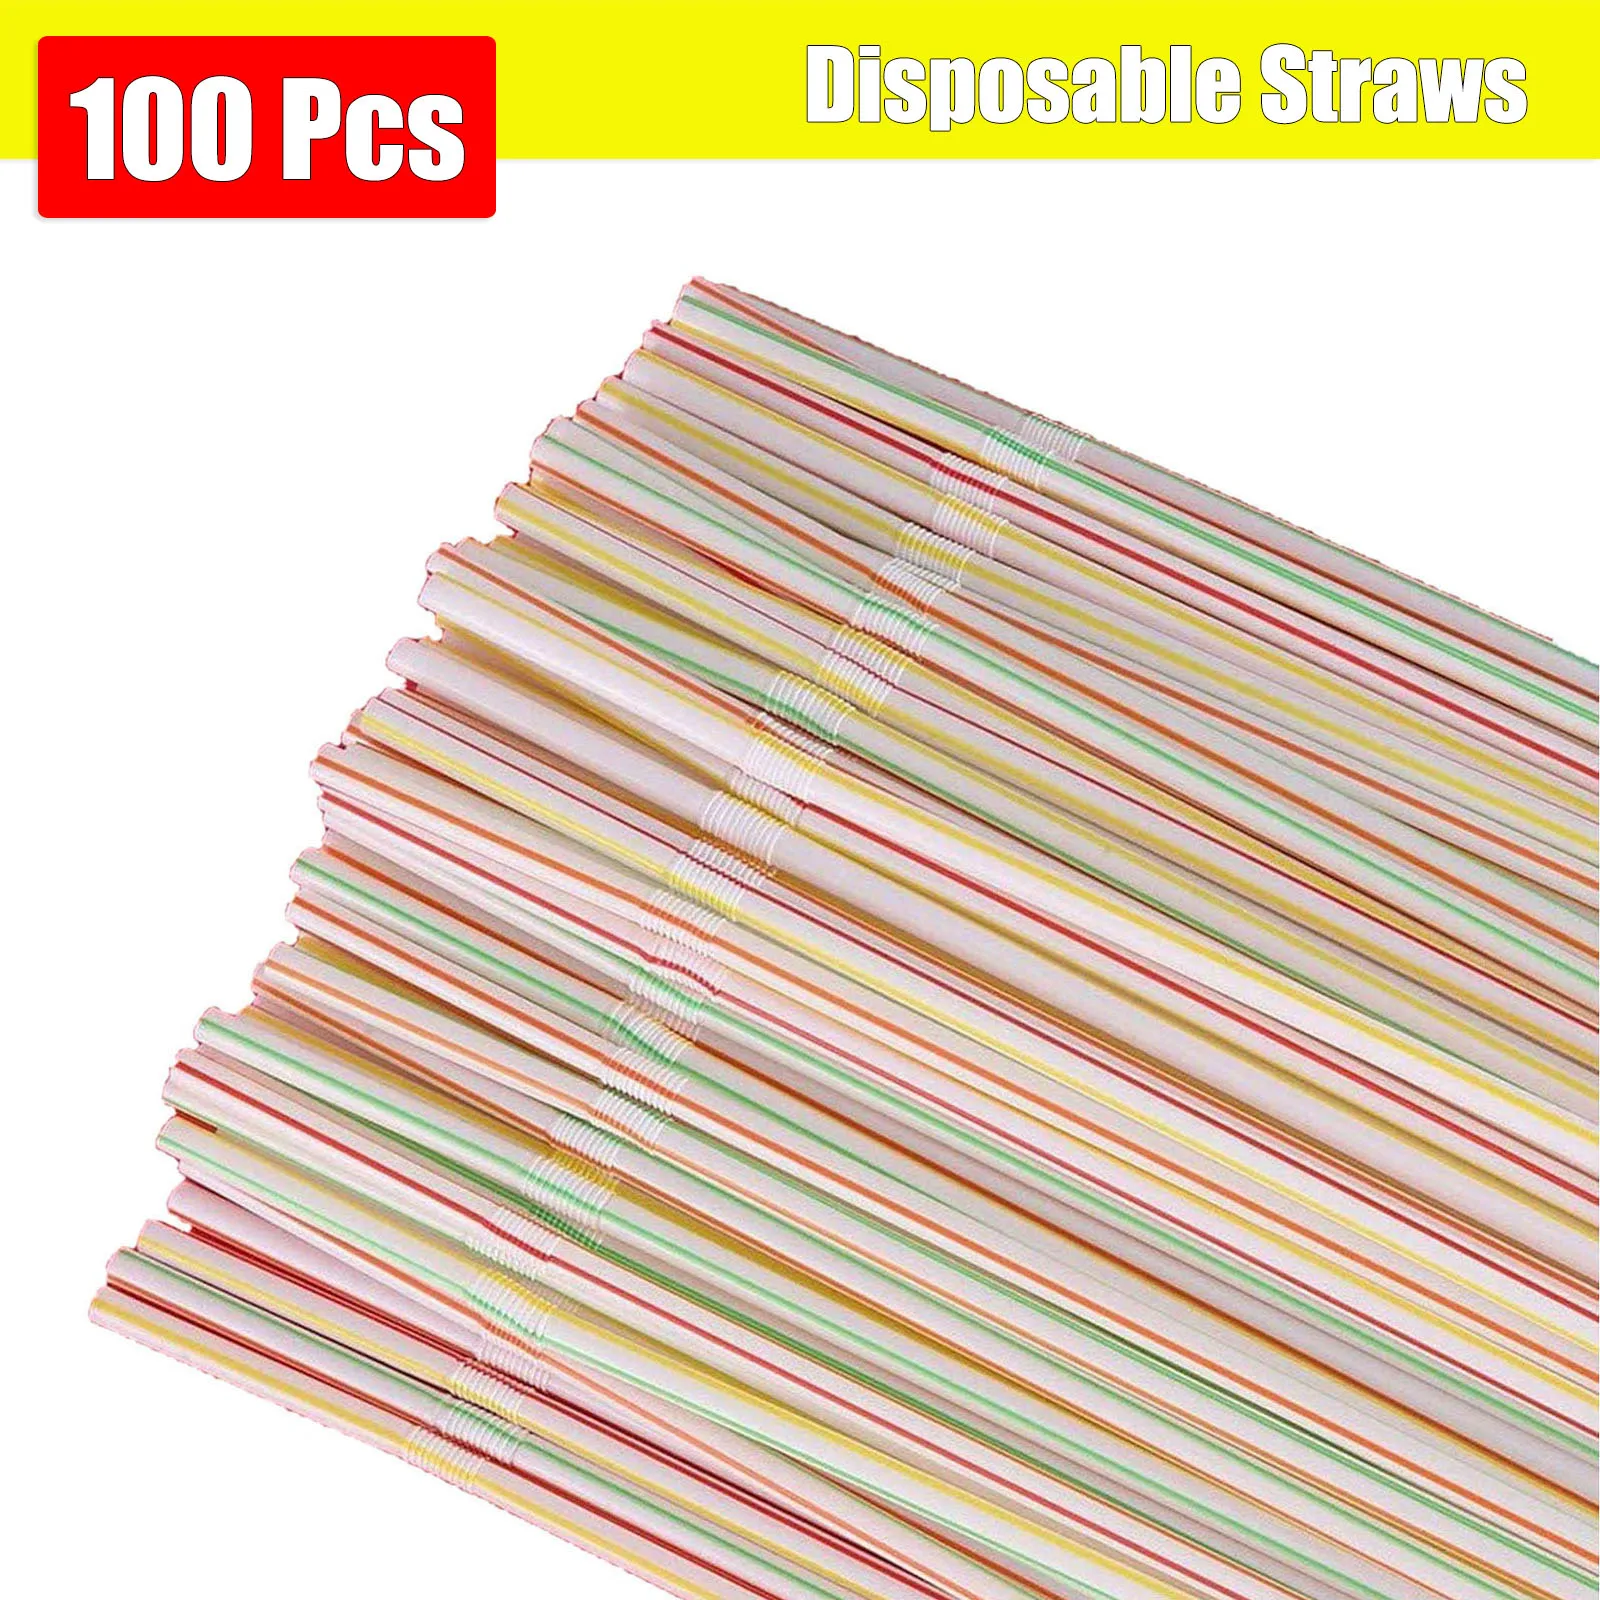 

100 Pcs Plastic Drinking Straws Multi-Colored Striped Home Disposable Kitchenware Party Dining Bar MultiColore Rainbow Straws